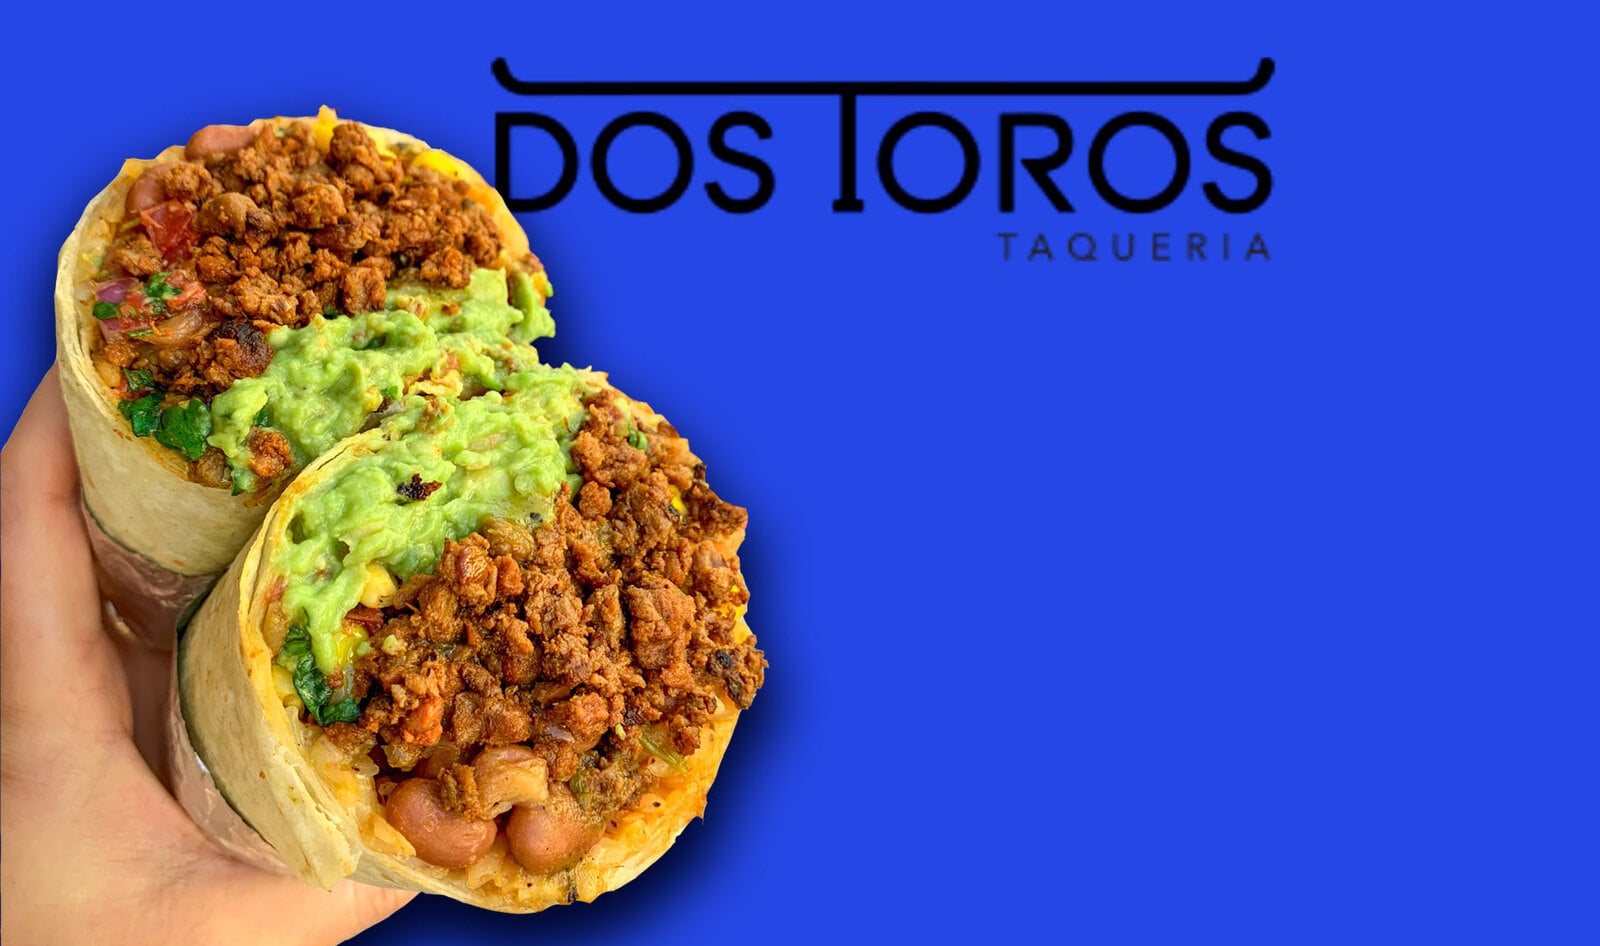 Taqueria Chain Dos Toros Adds Vegan Impossible Beef in New York and Chicago&nbsp;